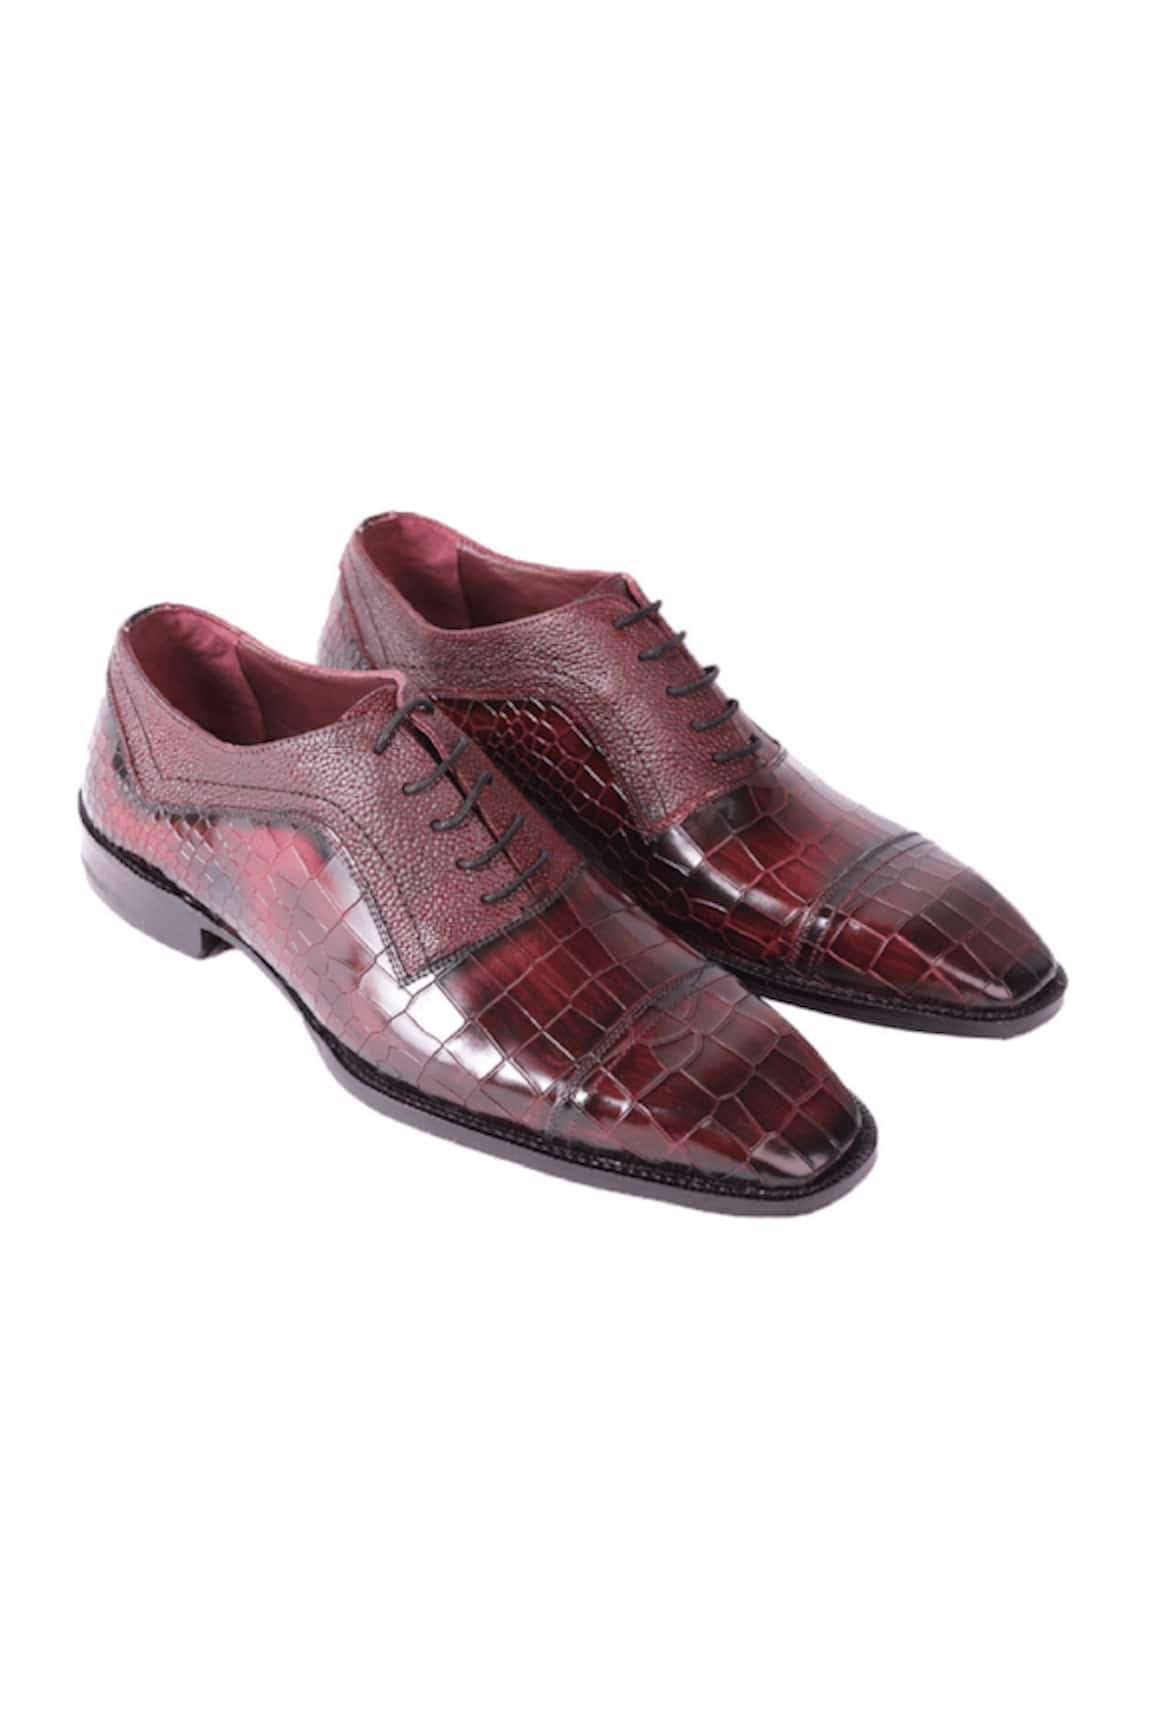 ZUFR Jude Croc Embossed Oxford Shoes